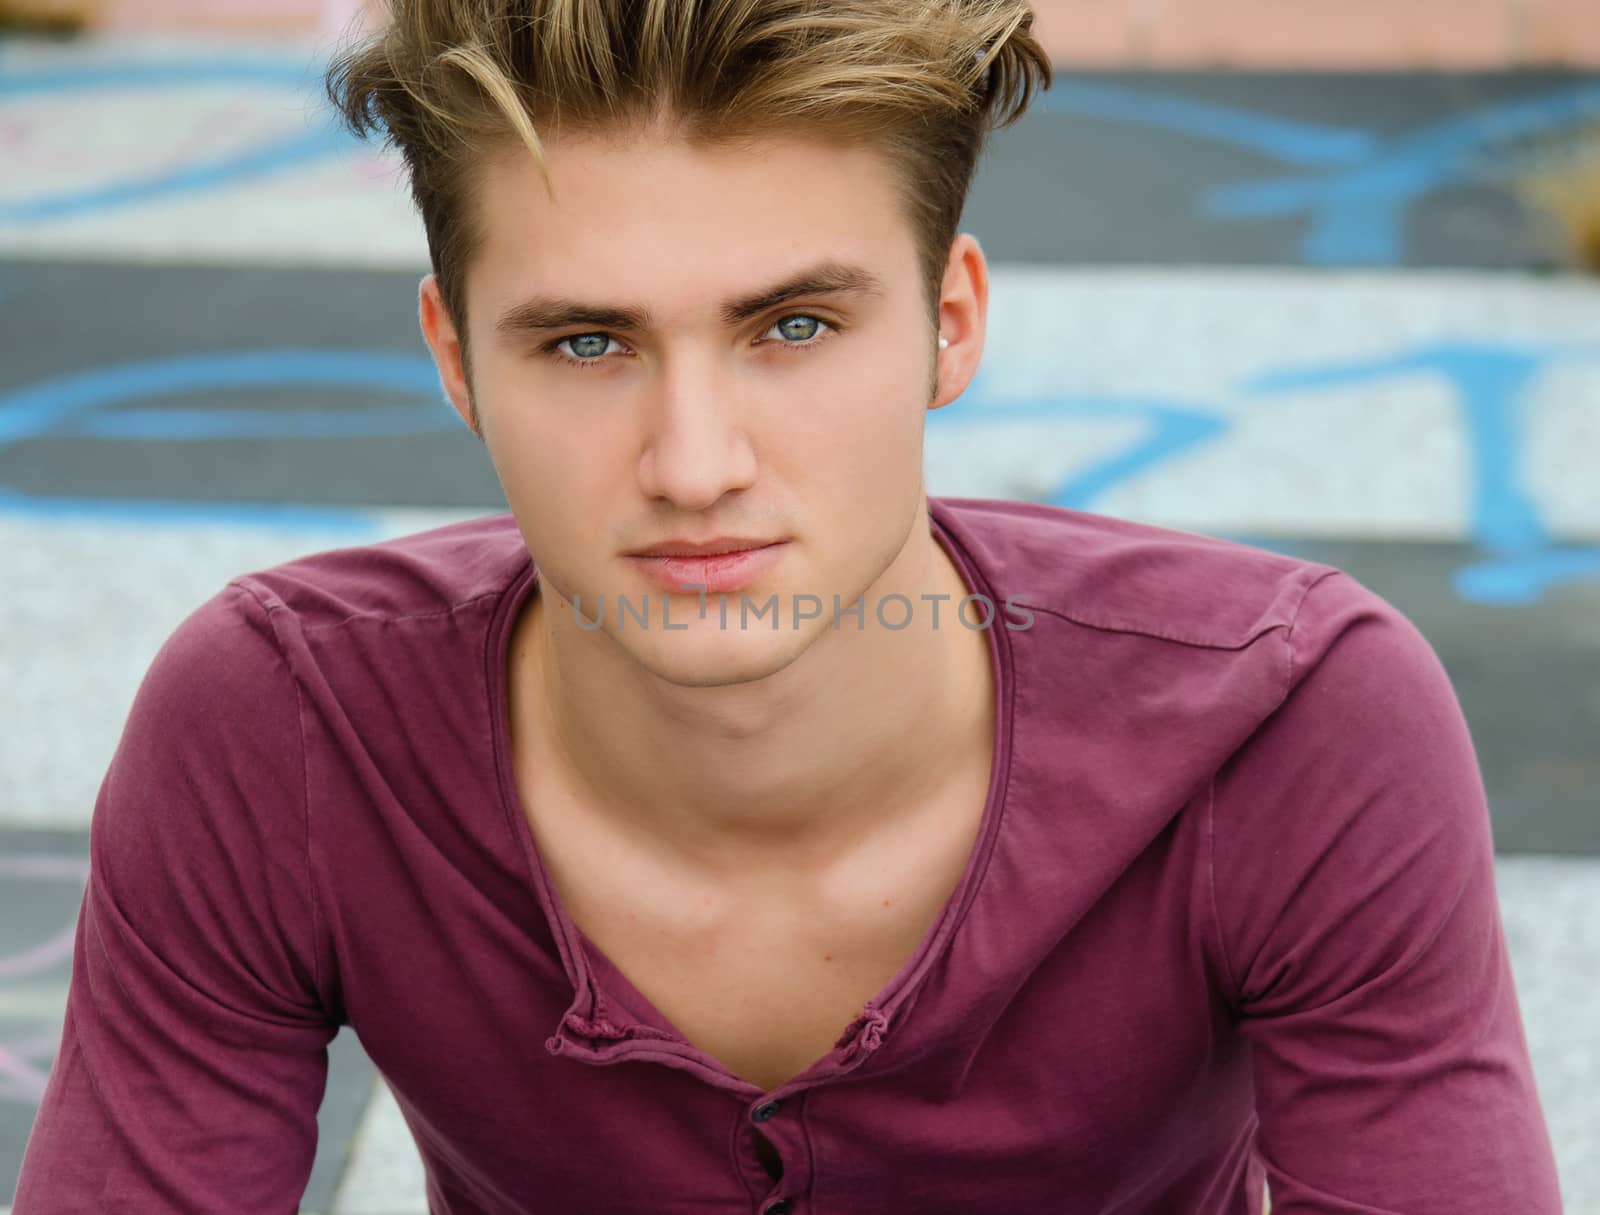 Attractive blue eyed, blond young man looking at camera outdoors